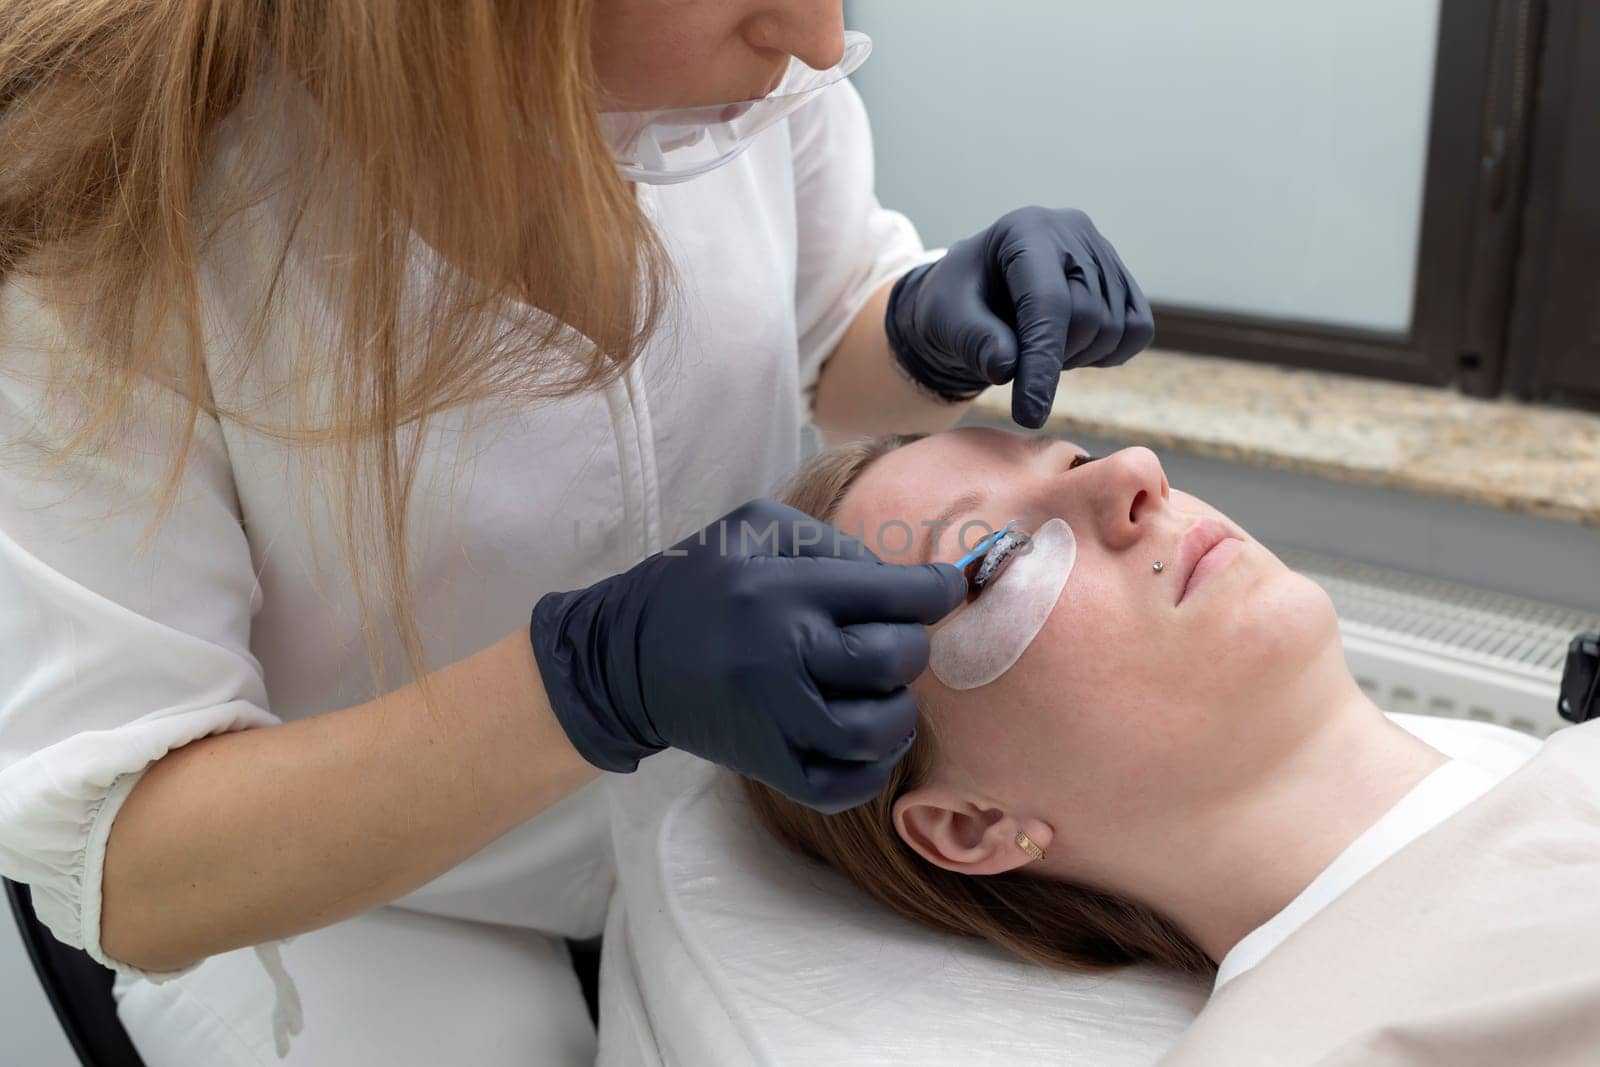 Beautician Applies Lash Lift Lotion On Rolled Hair During Eyelash Lamination Treatment Procedure In Beauty Salon. Curling, Staining, Extension Procedures For Lashes. Horizontal Plane. Step By Step by netatsi